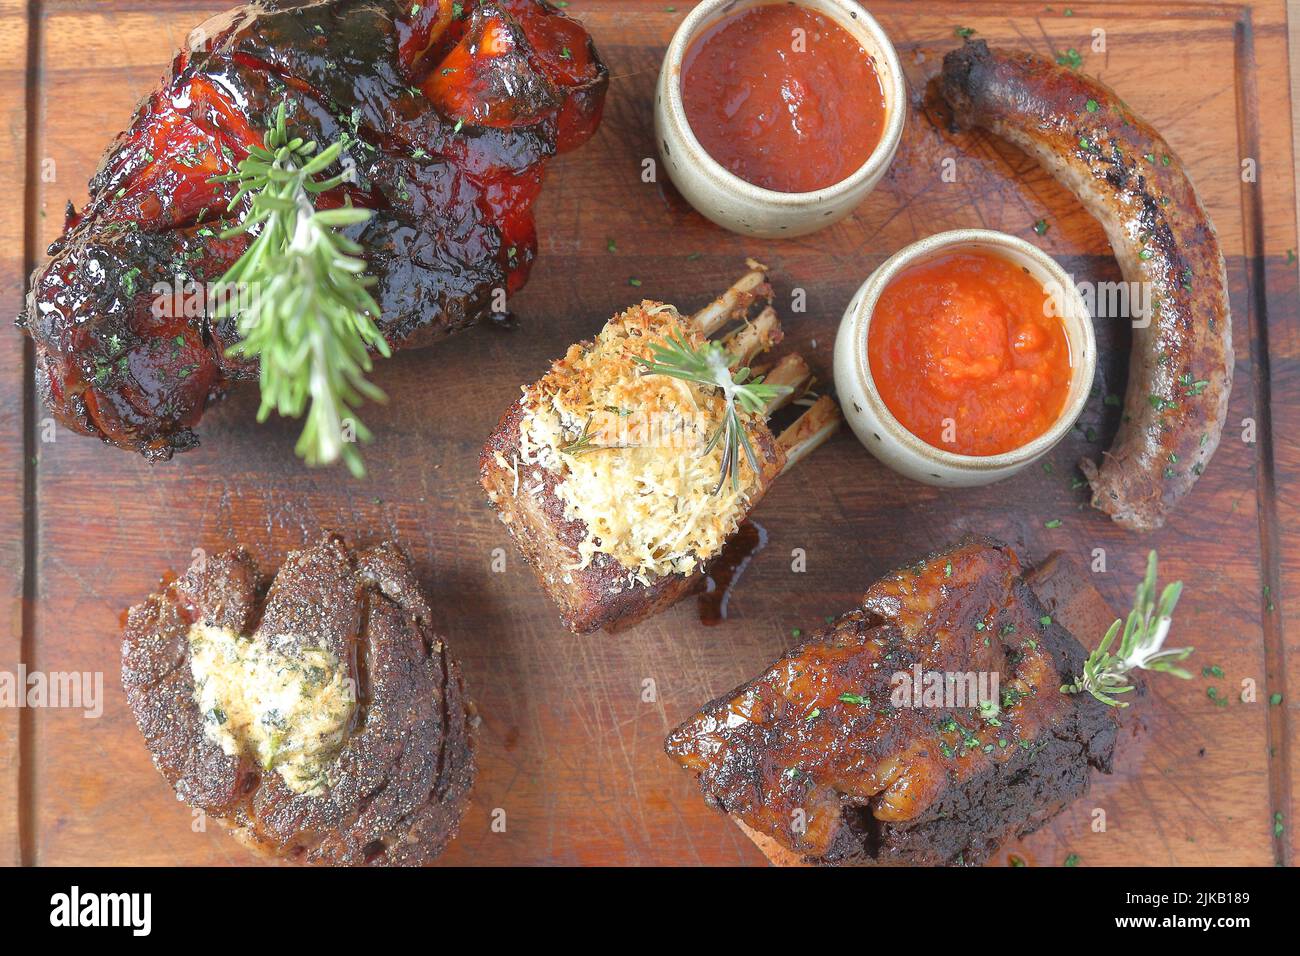 Mixed barbequed meat platter with roast, lamb, pork and sausage garnished with tomato based sauces presented on a wooden board Stock Photo